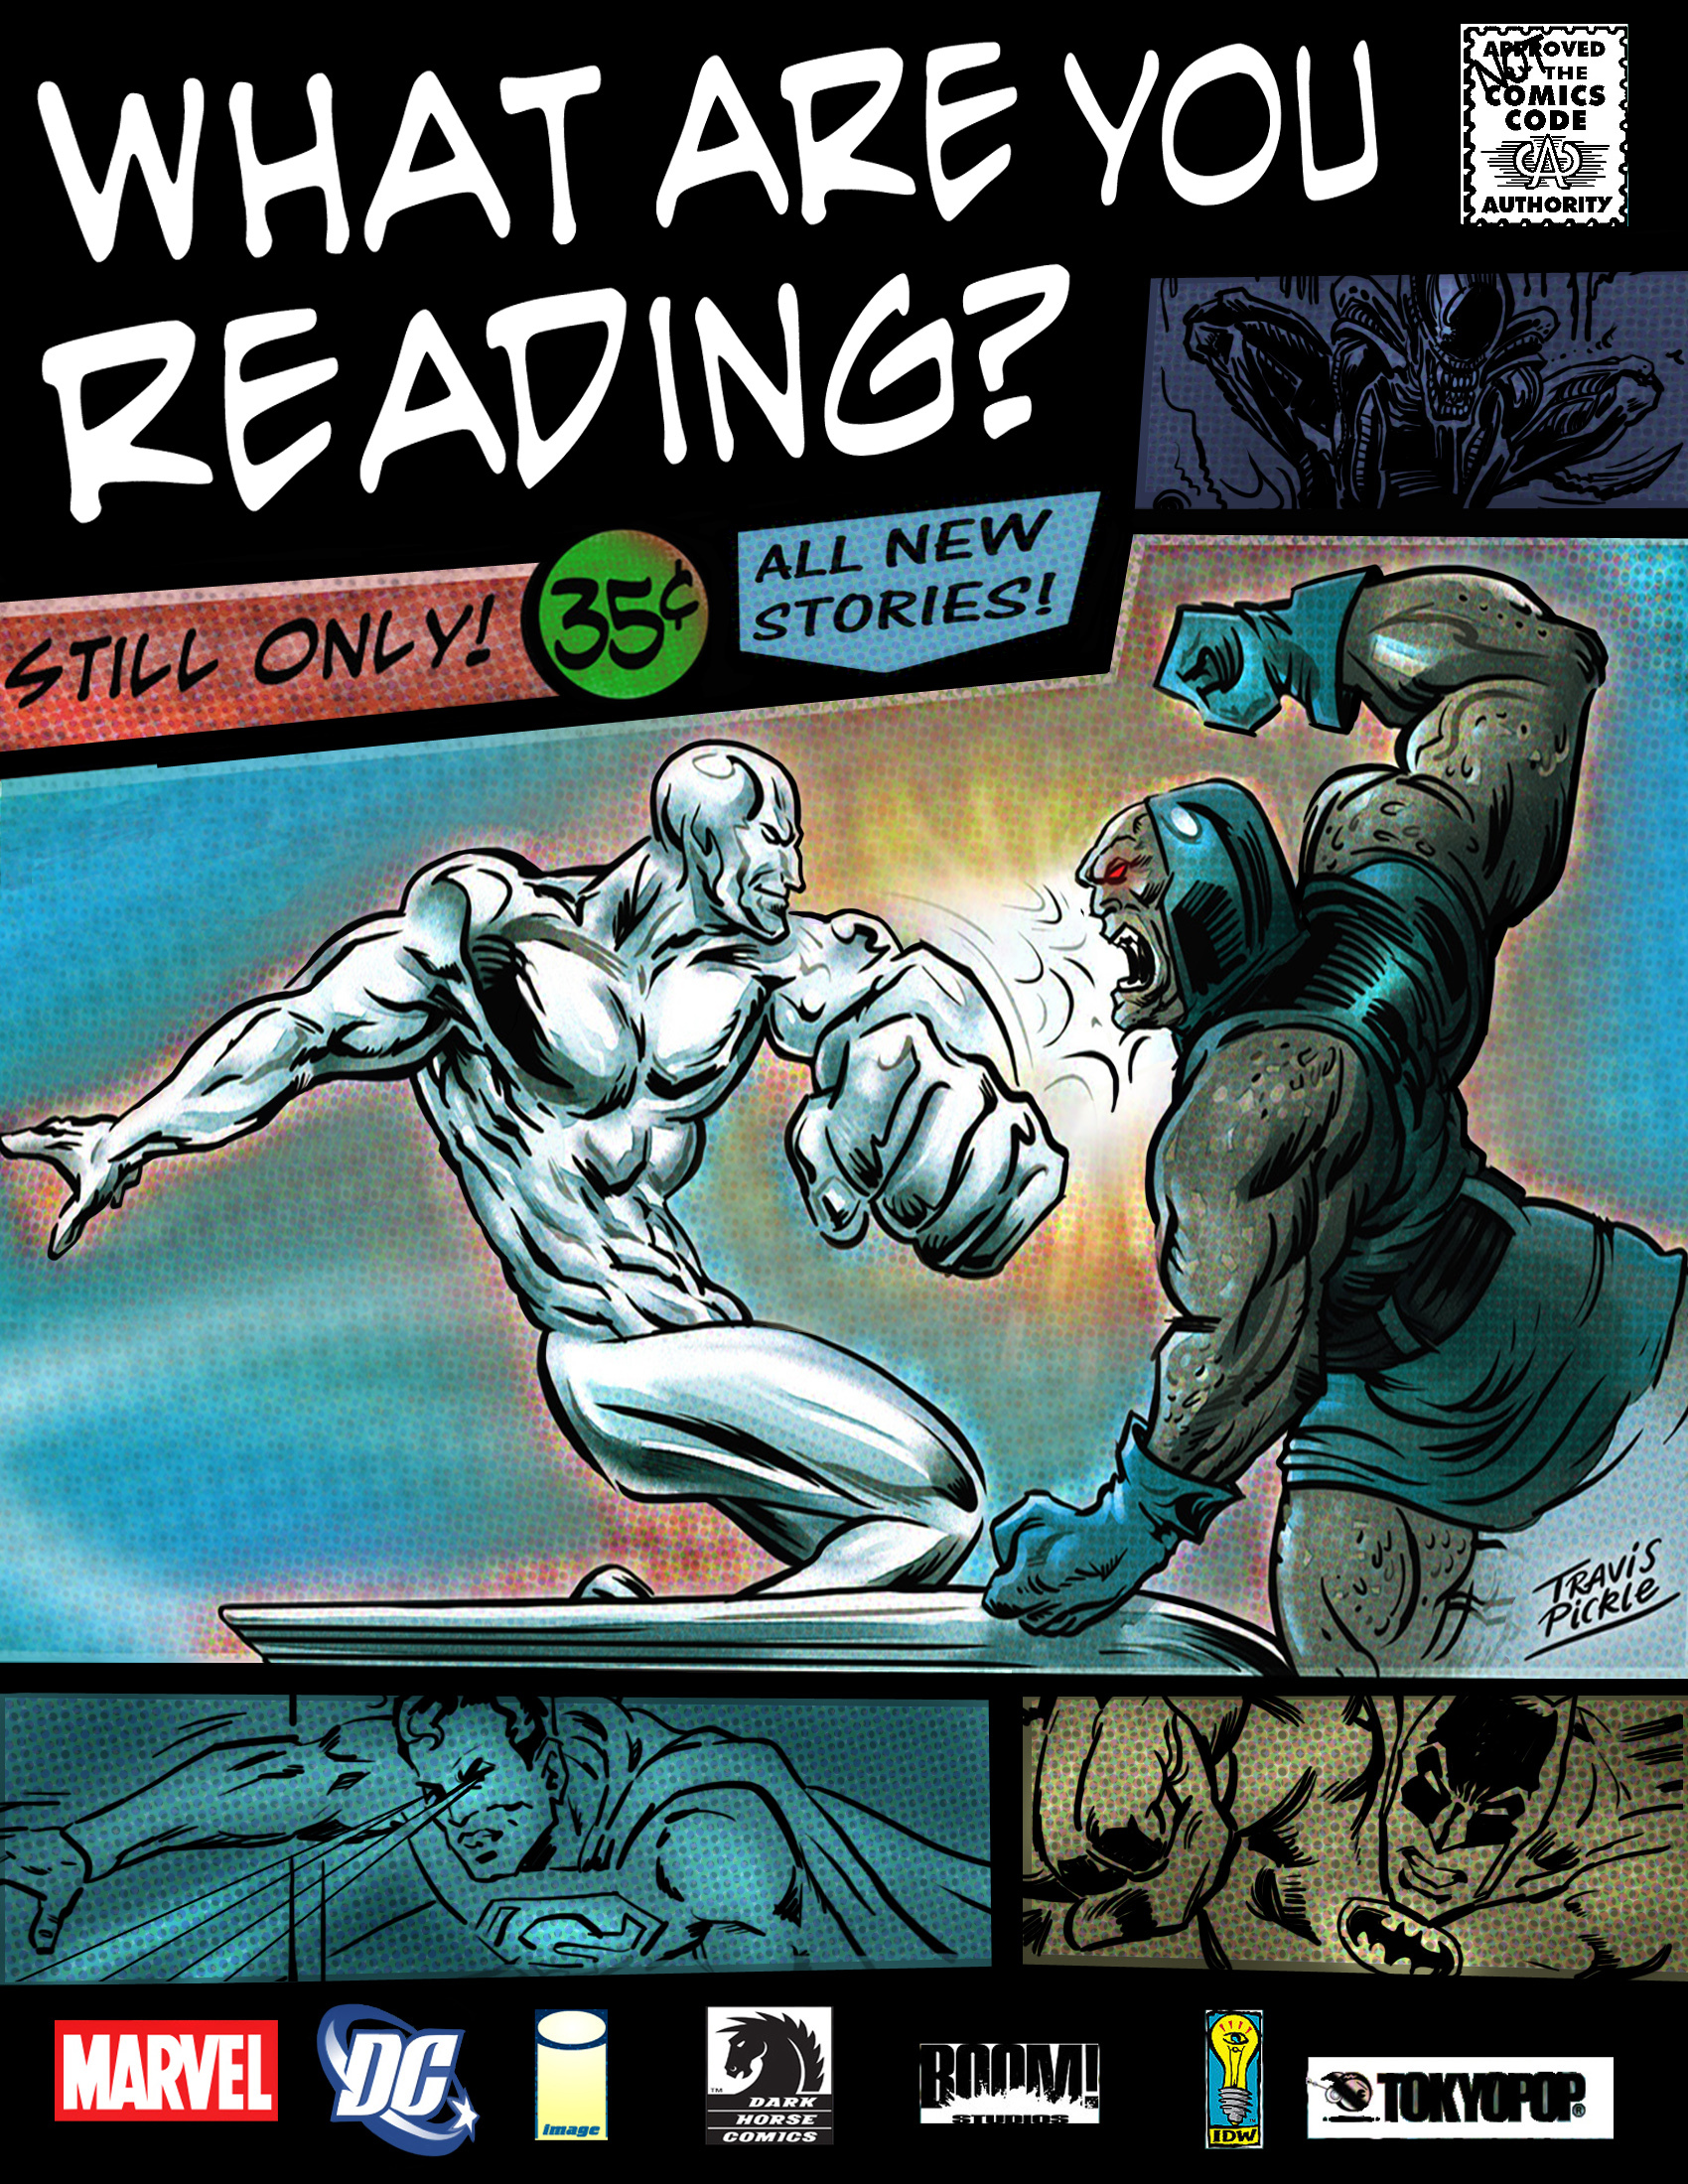 What Are You Reading? Volume 8 Issue 2